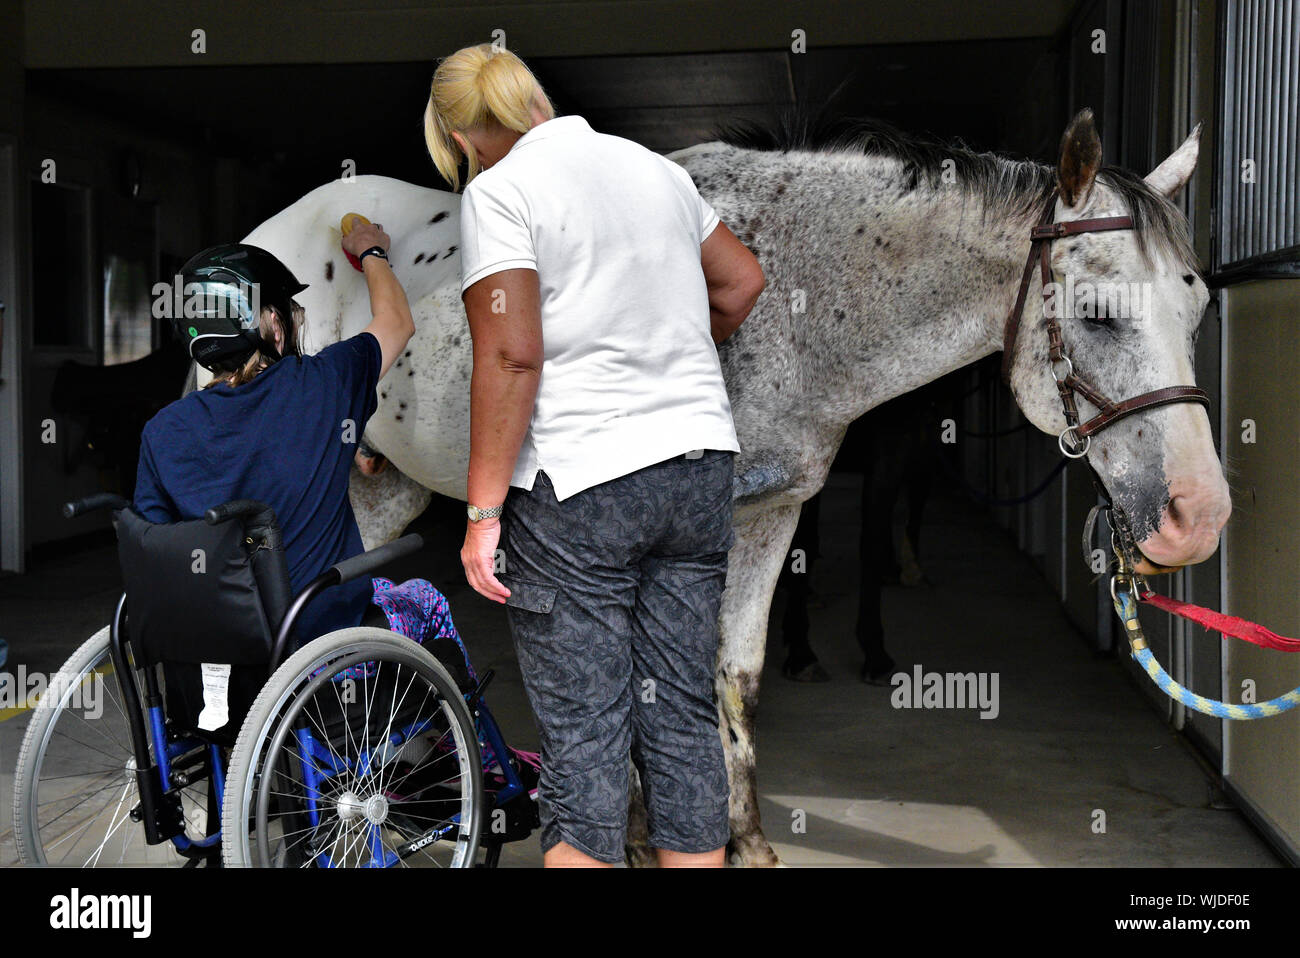 Symbiotic relationship between physically challenged person and horse.  Equine therapy is used for helping challenged people. Stock Photo